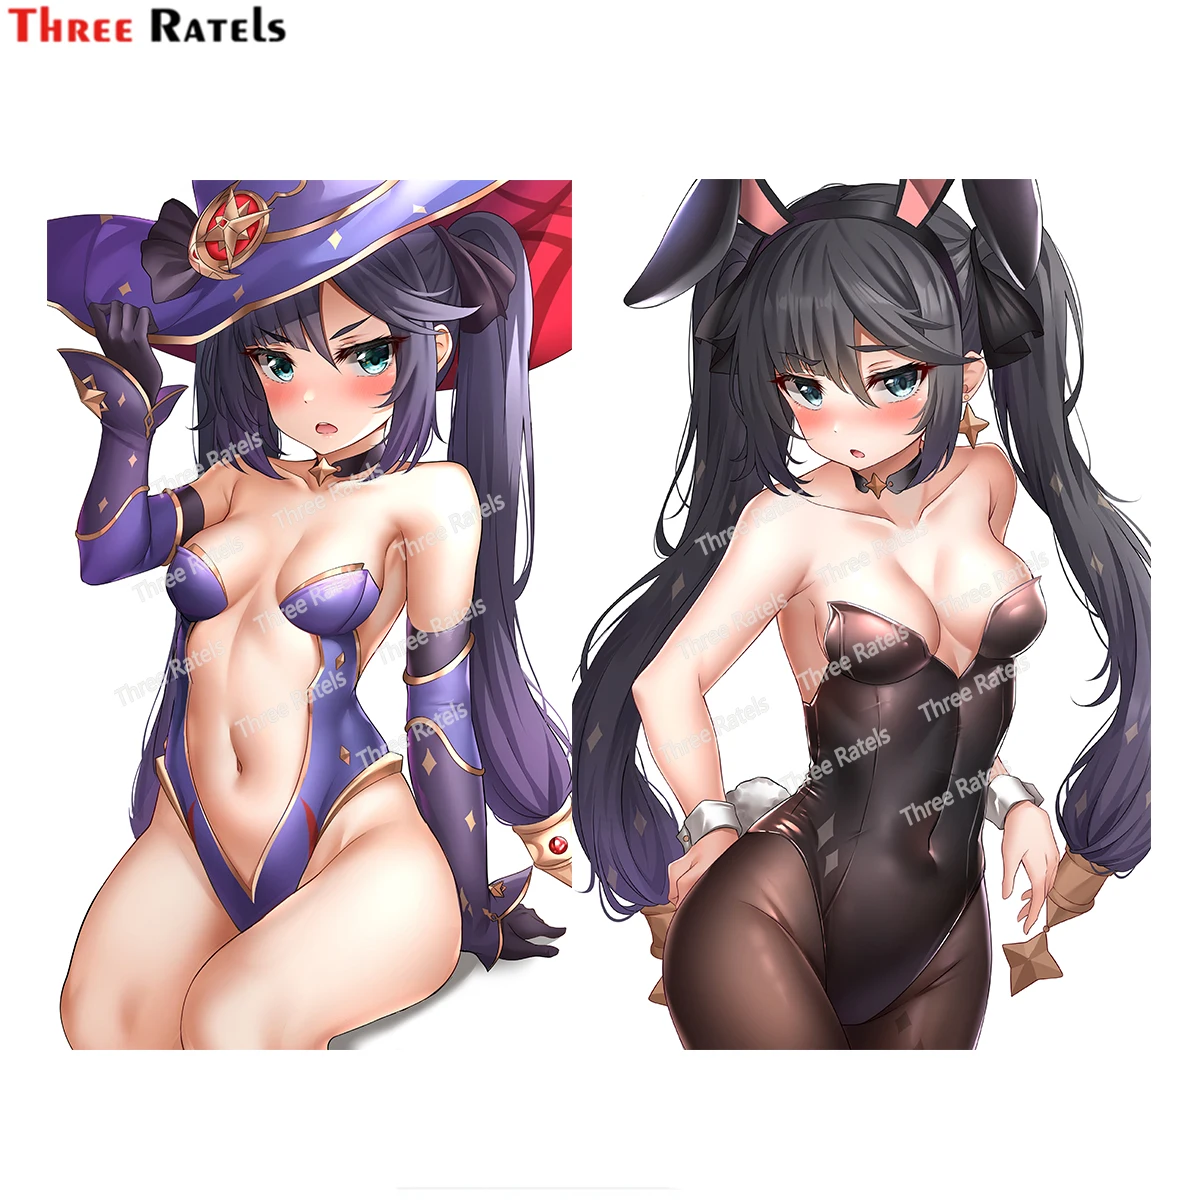 

Three Ratels H94 Mona Genshin Impact Sexy Anime Girl Stickers Decorate Cars, Rooms, Wardrobes, Desks,Computer